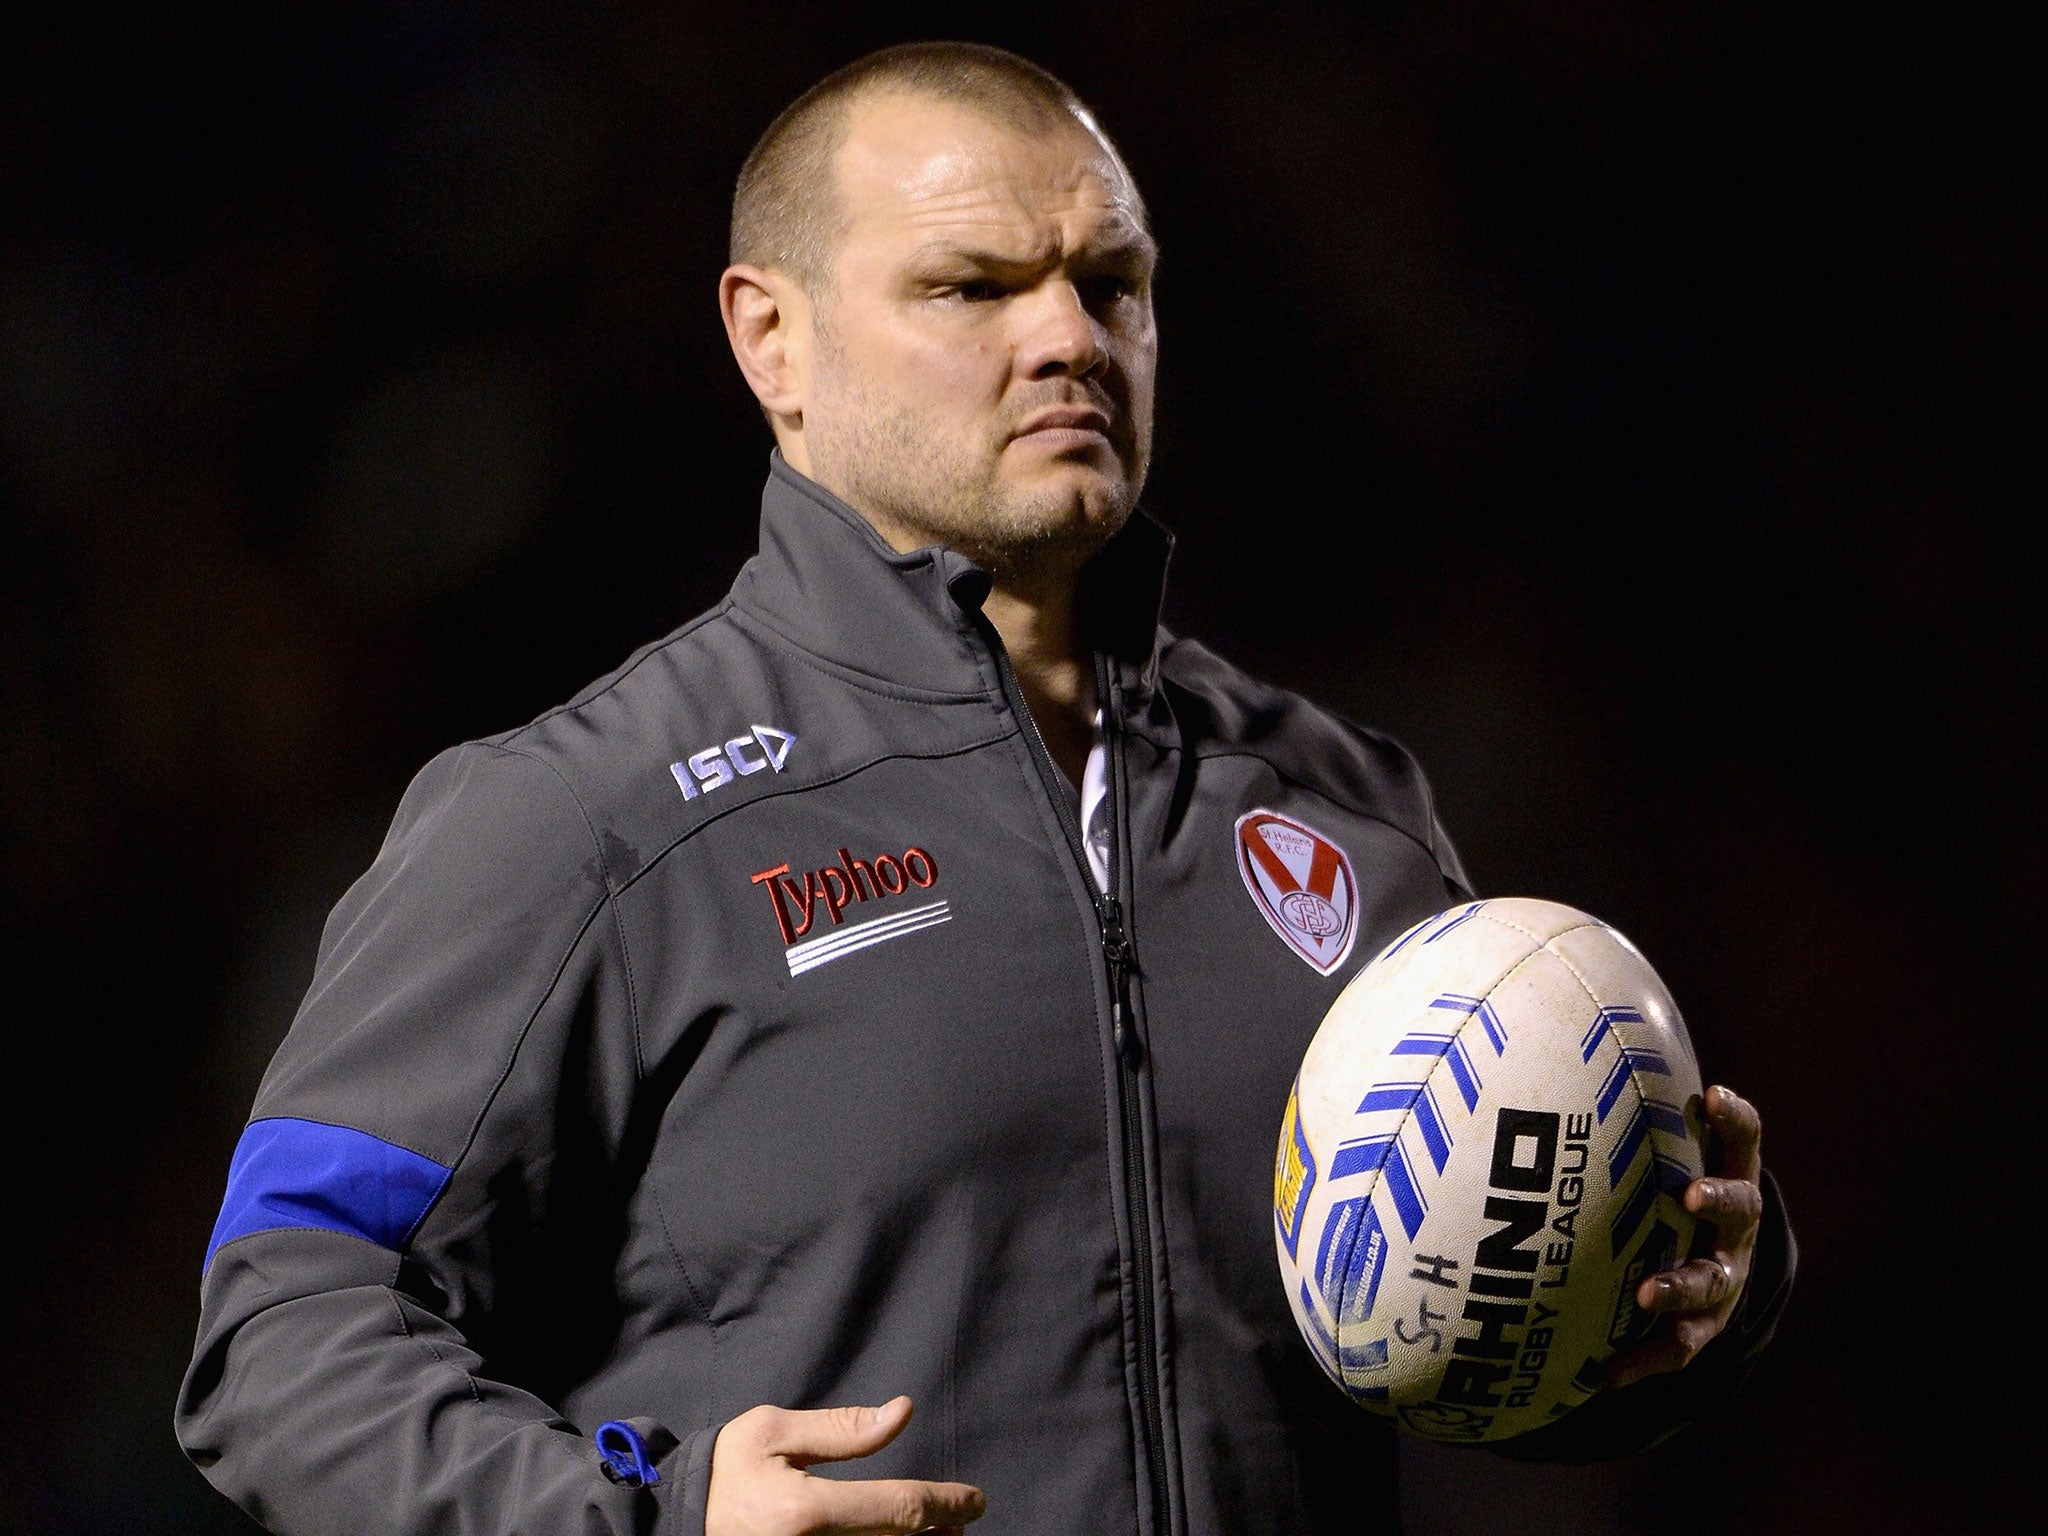 Keiron Cunningham lost his first Super League game as St Helens coach last night